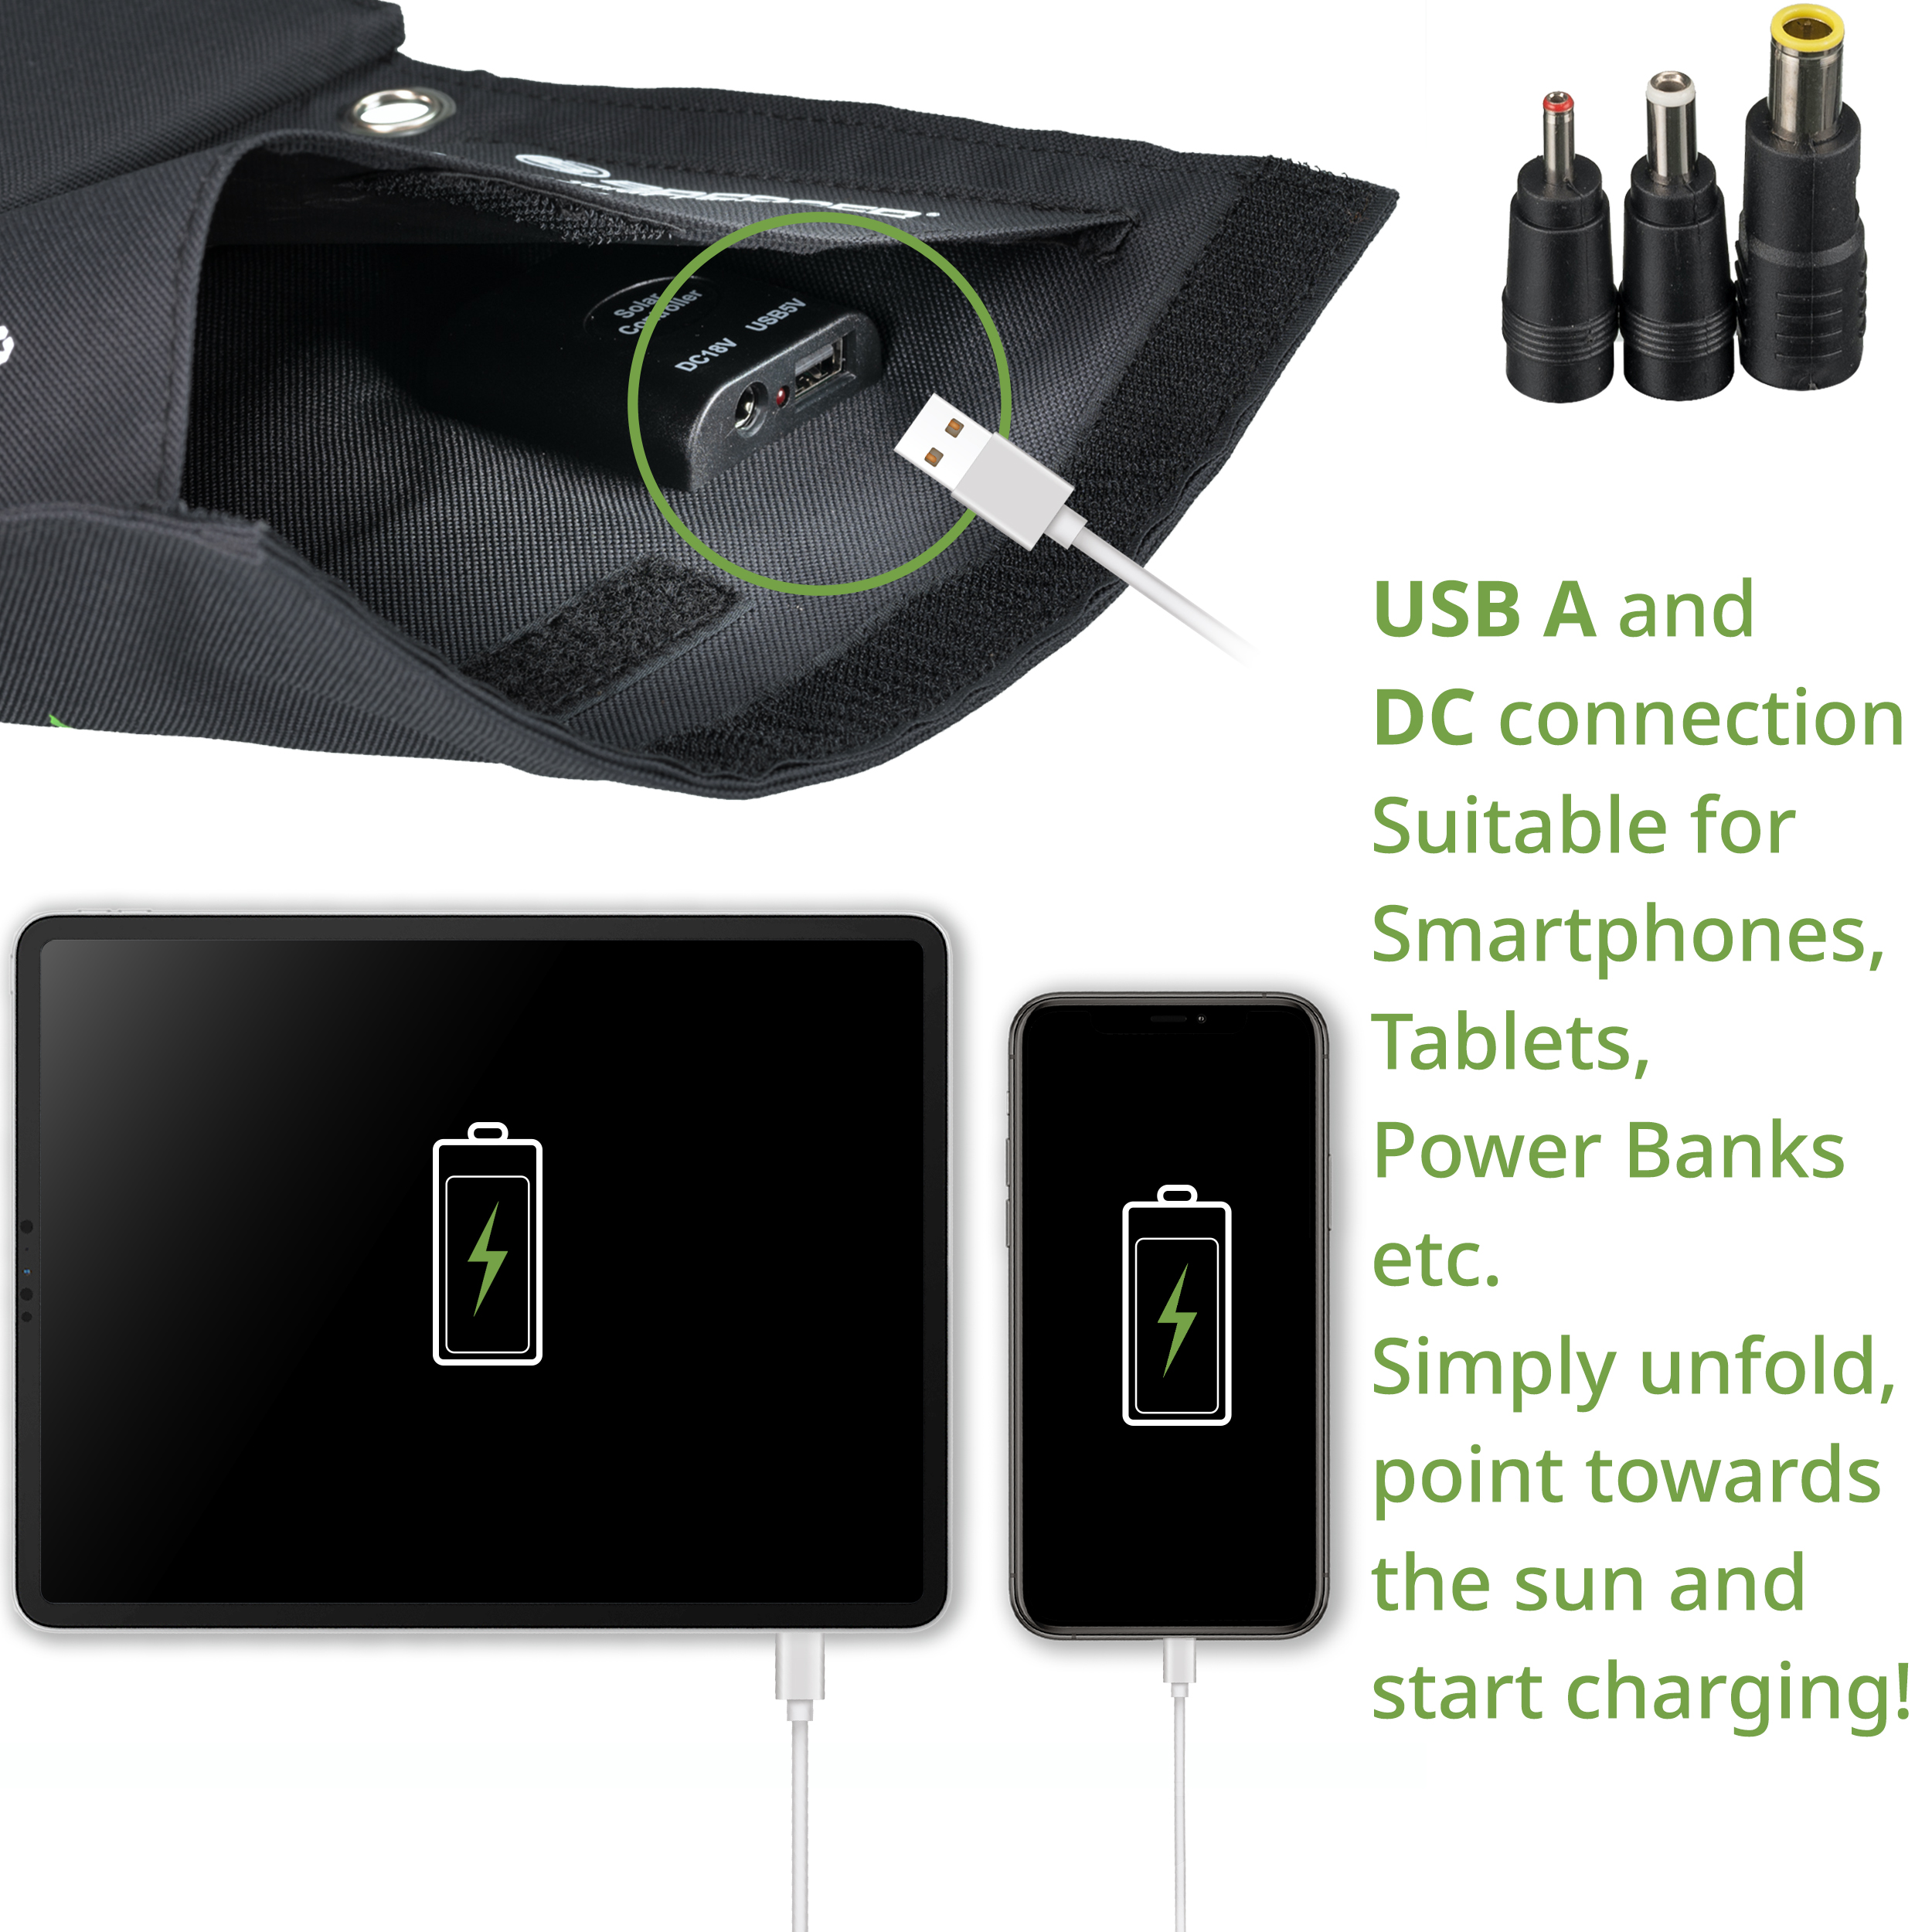 BRESSER Mobile Solar Charger 21 Watt with USB and DC output